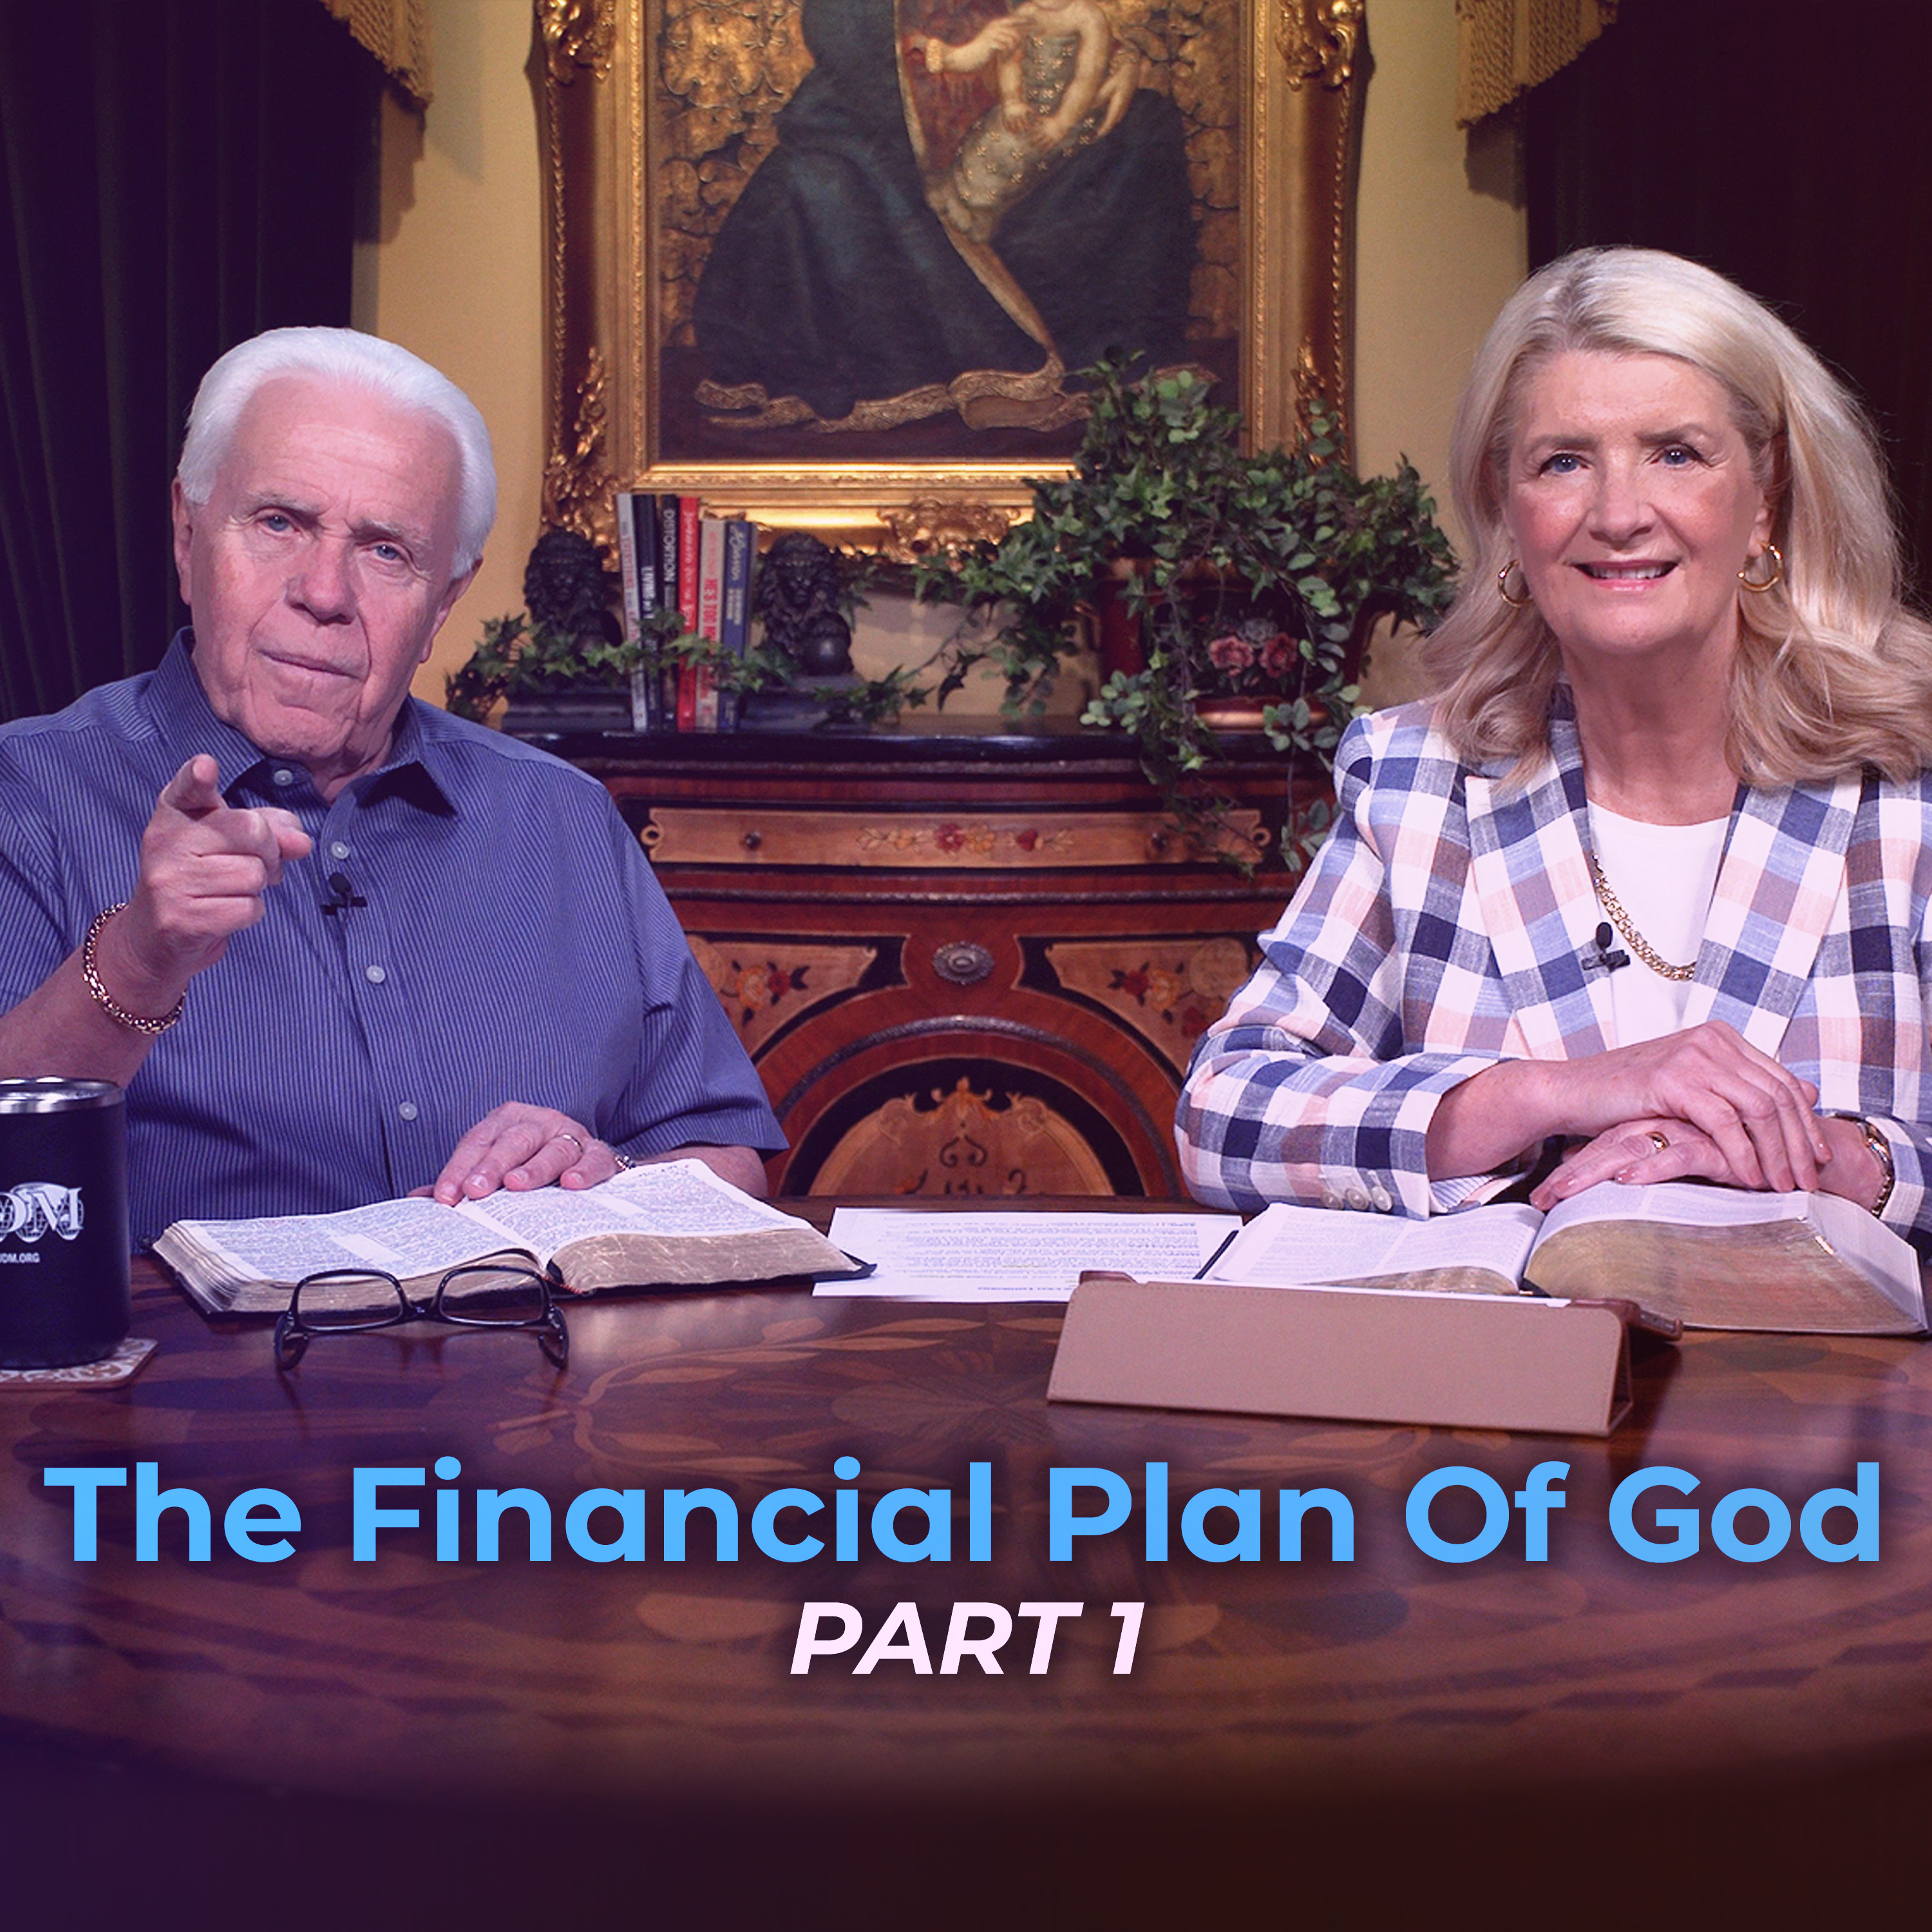 The Financial Plan Of God, Part 1